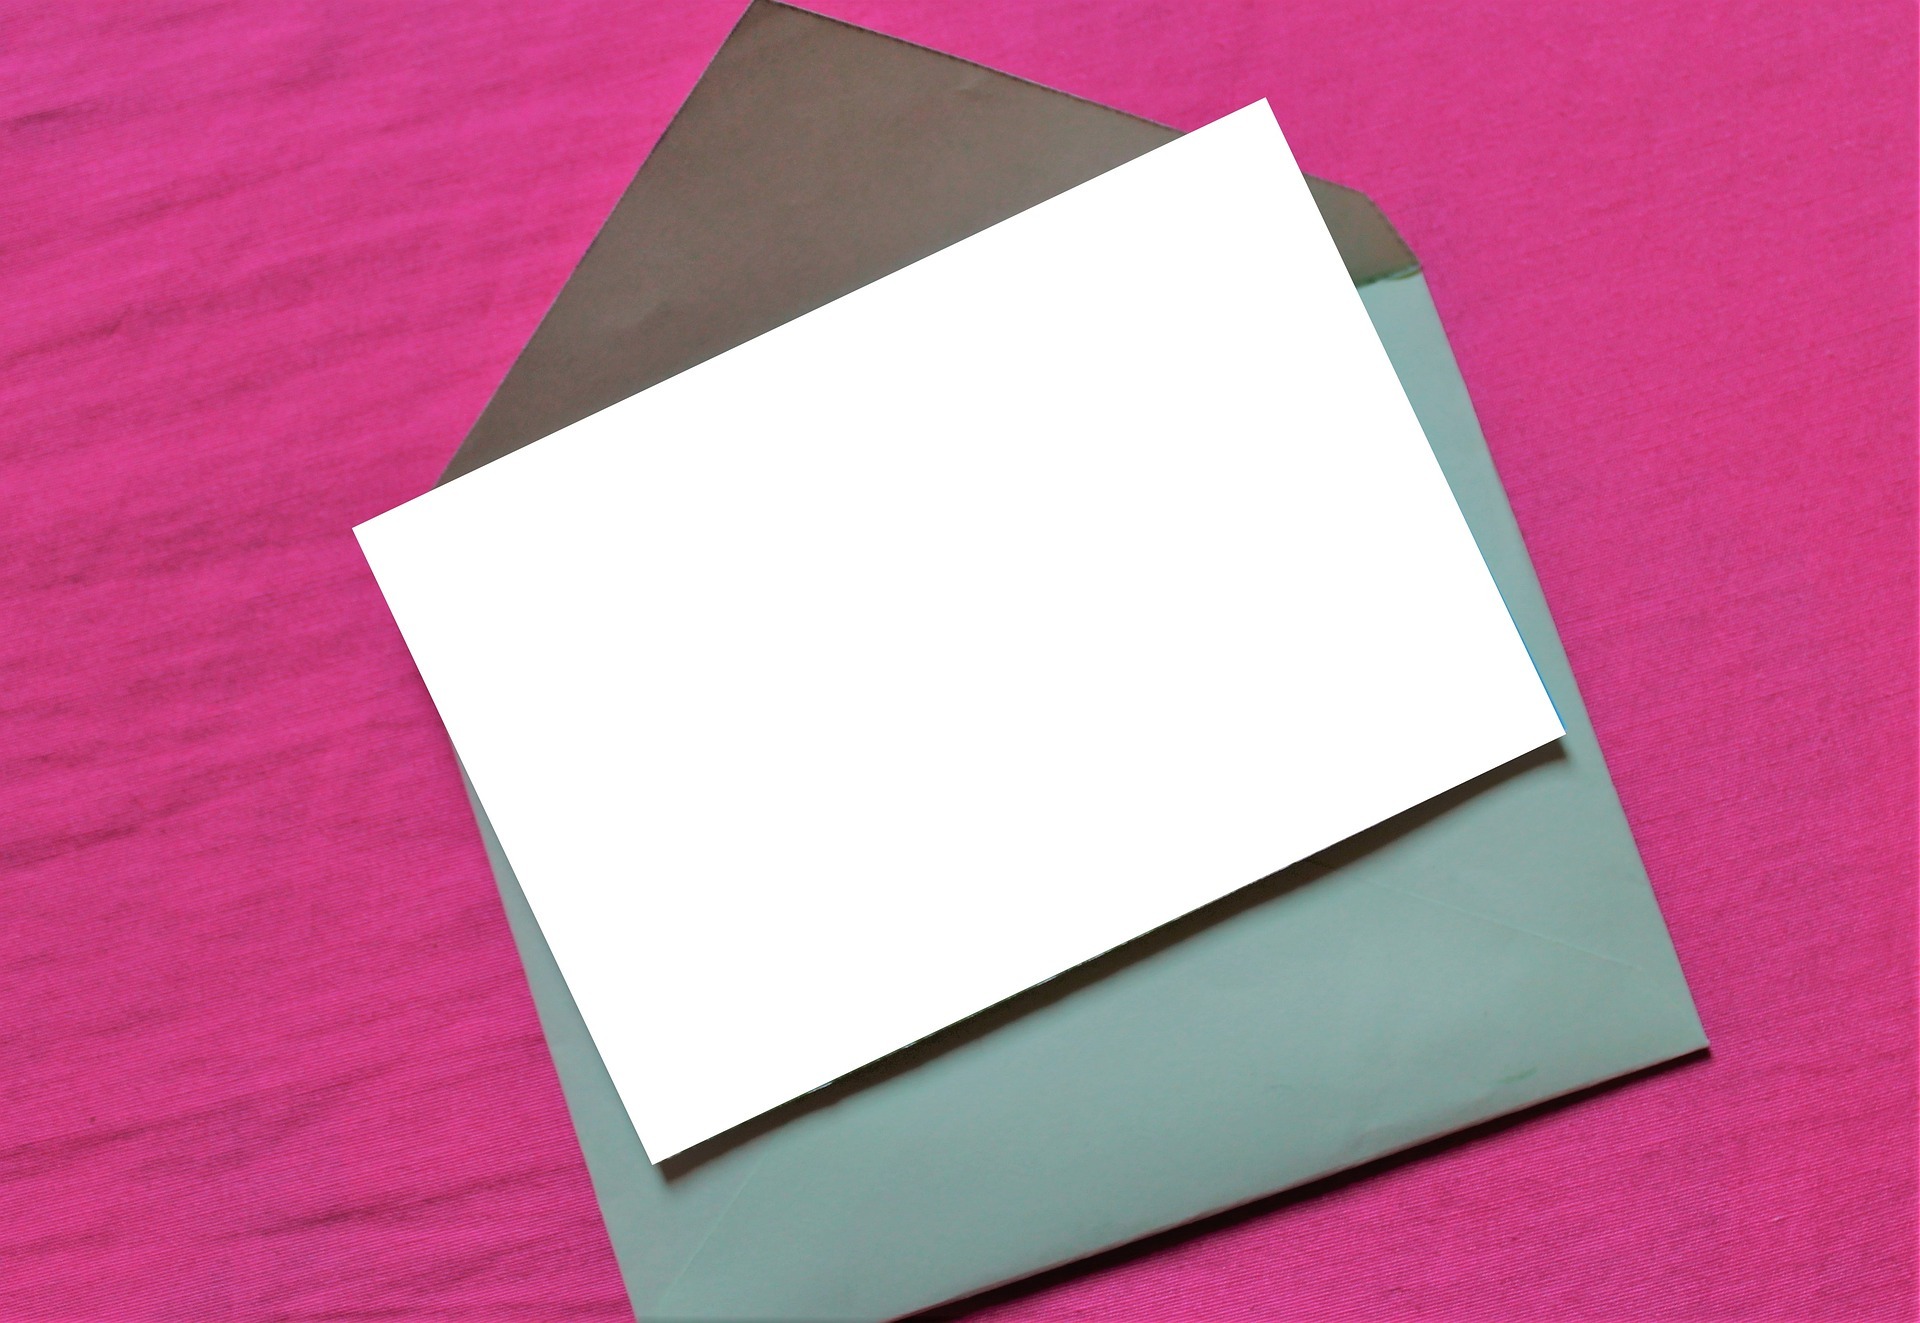 a blank invitation card against a pink background